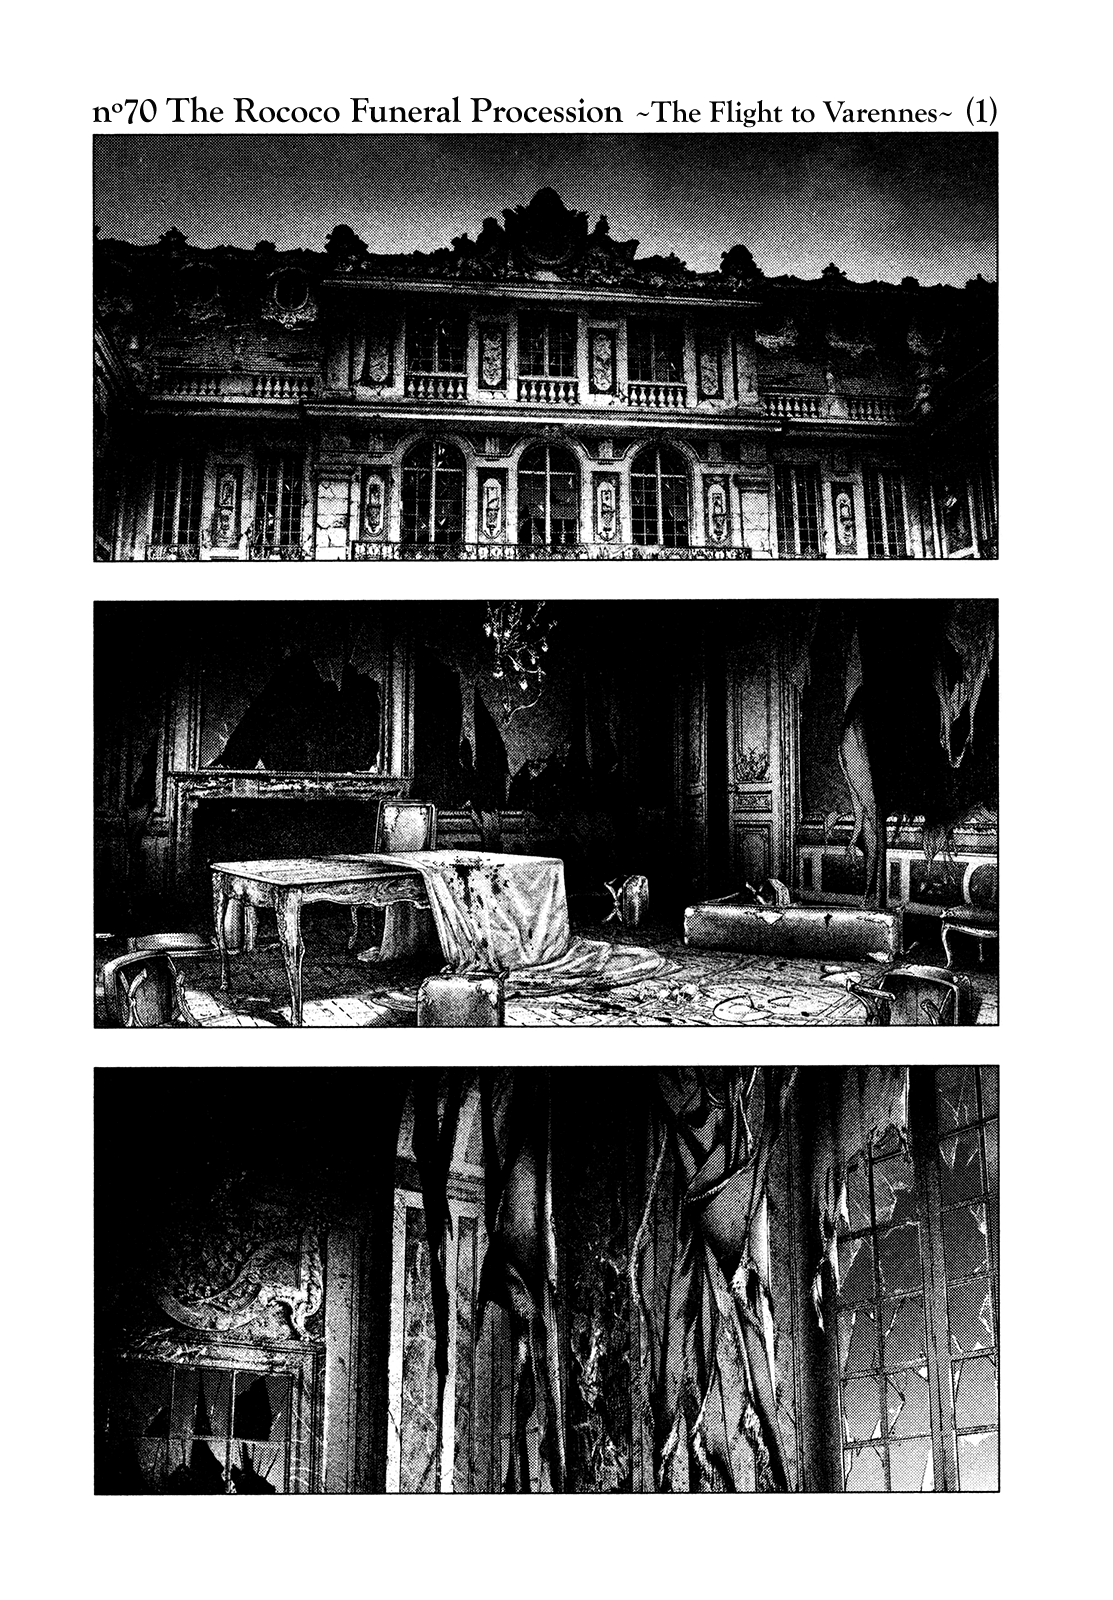 Innocent Rouge Vol.10-Chapter.70-The-Rococo-Funeral-Procession-~The-Flight-to-Varennes~-(1) Image